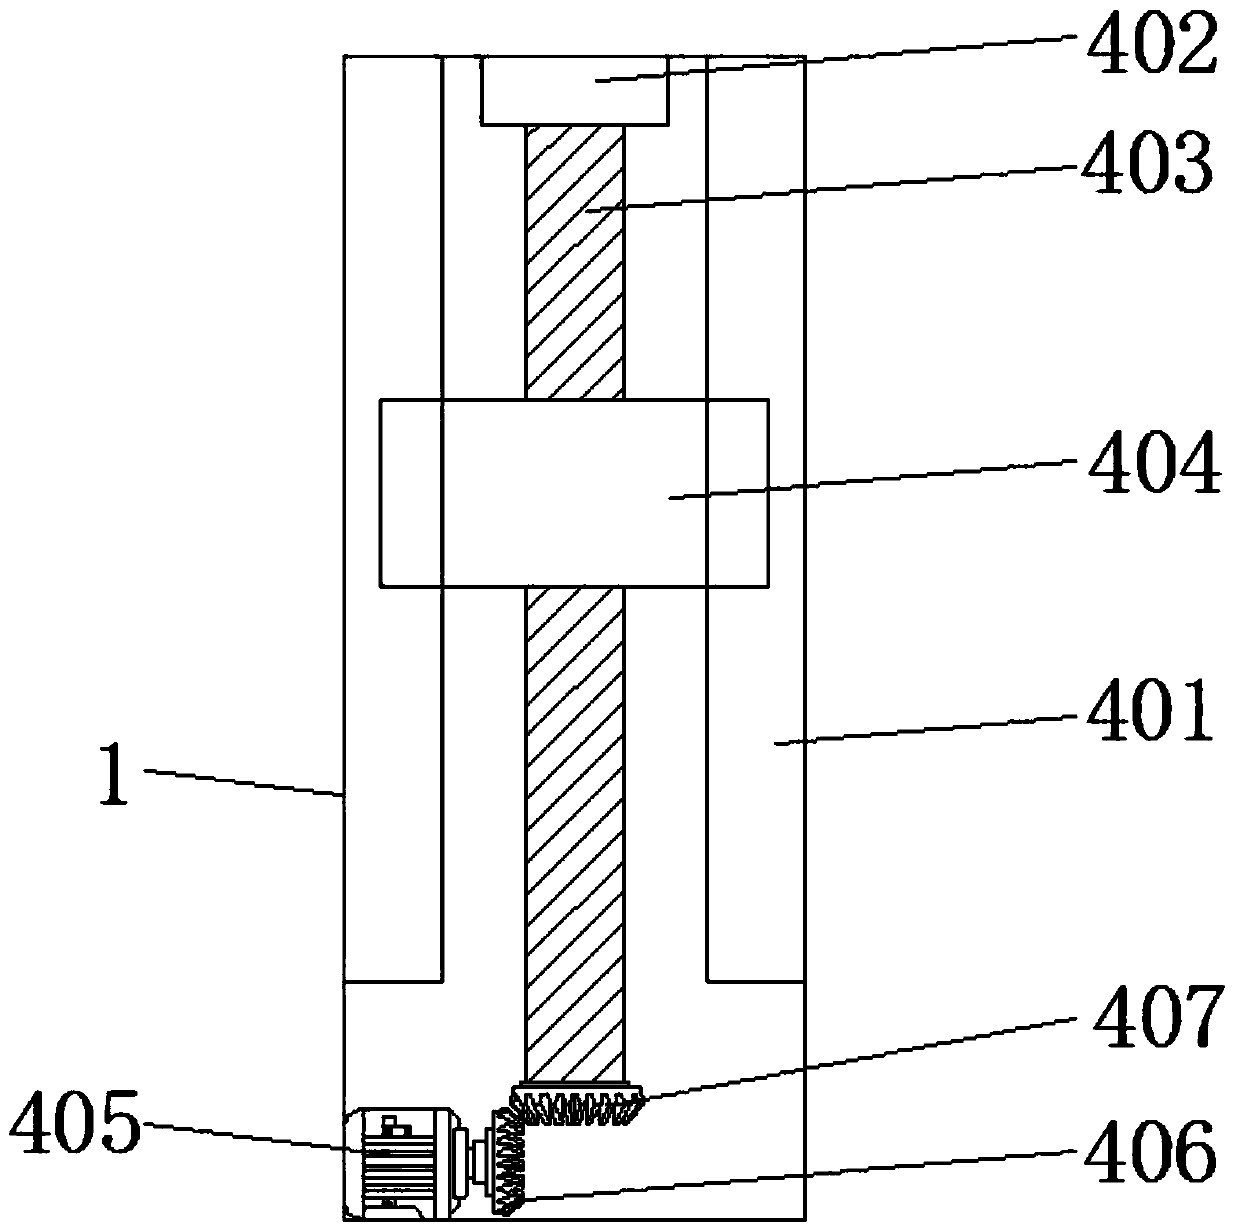 Surveying and mapping instrument fixing device for physics